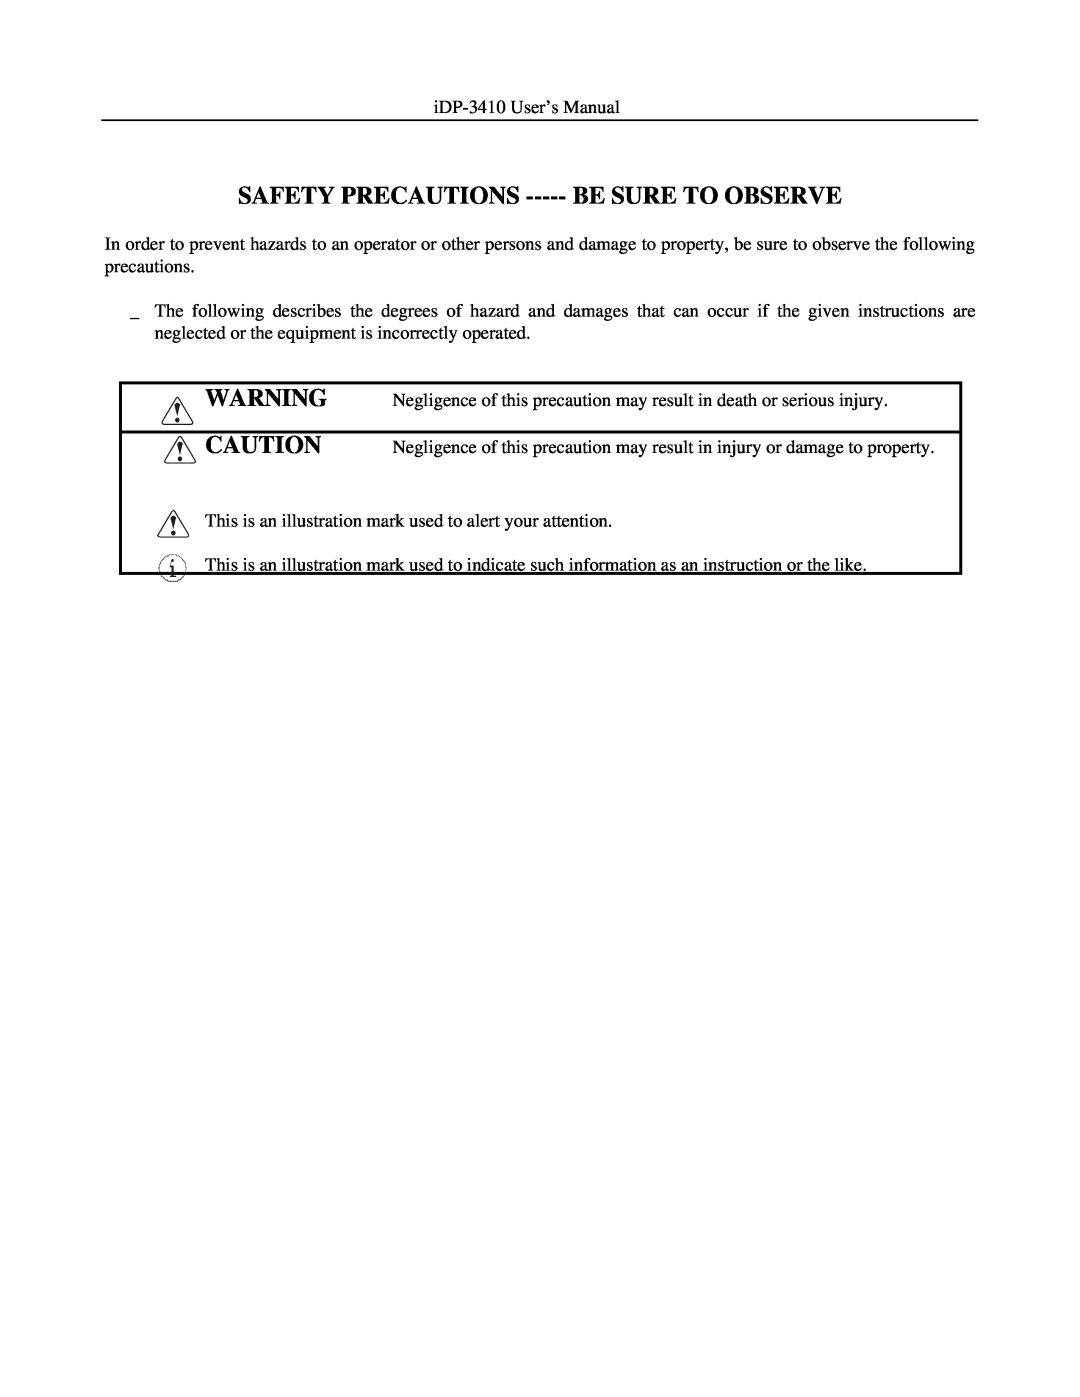 Addlogix iDP-3410 user manual Safety Precautions, Be Sure To Observe 